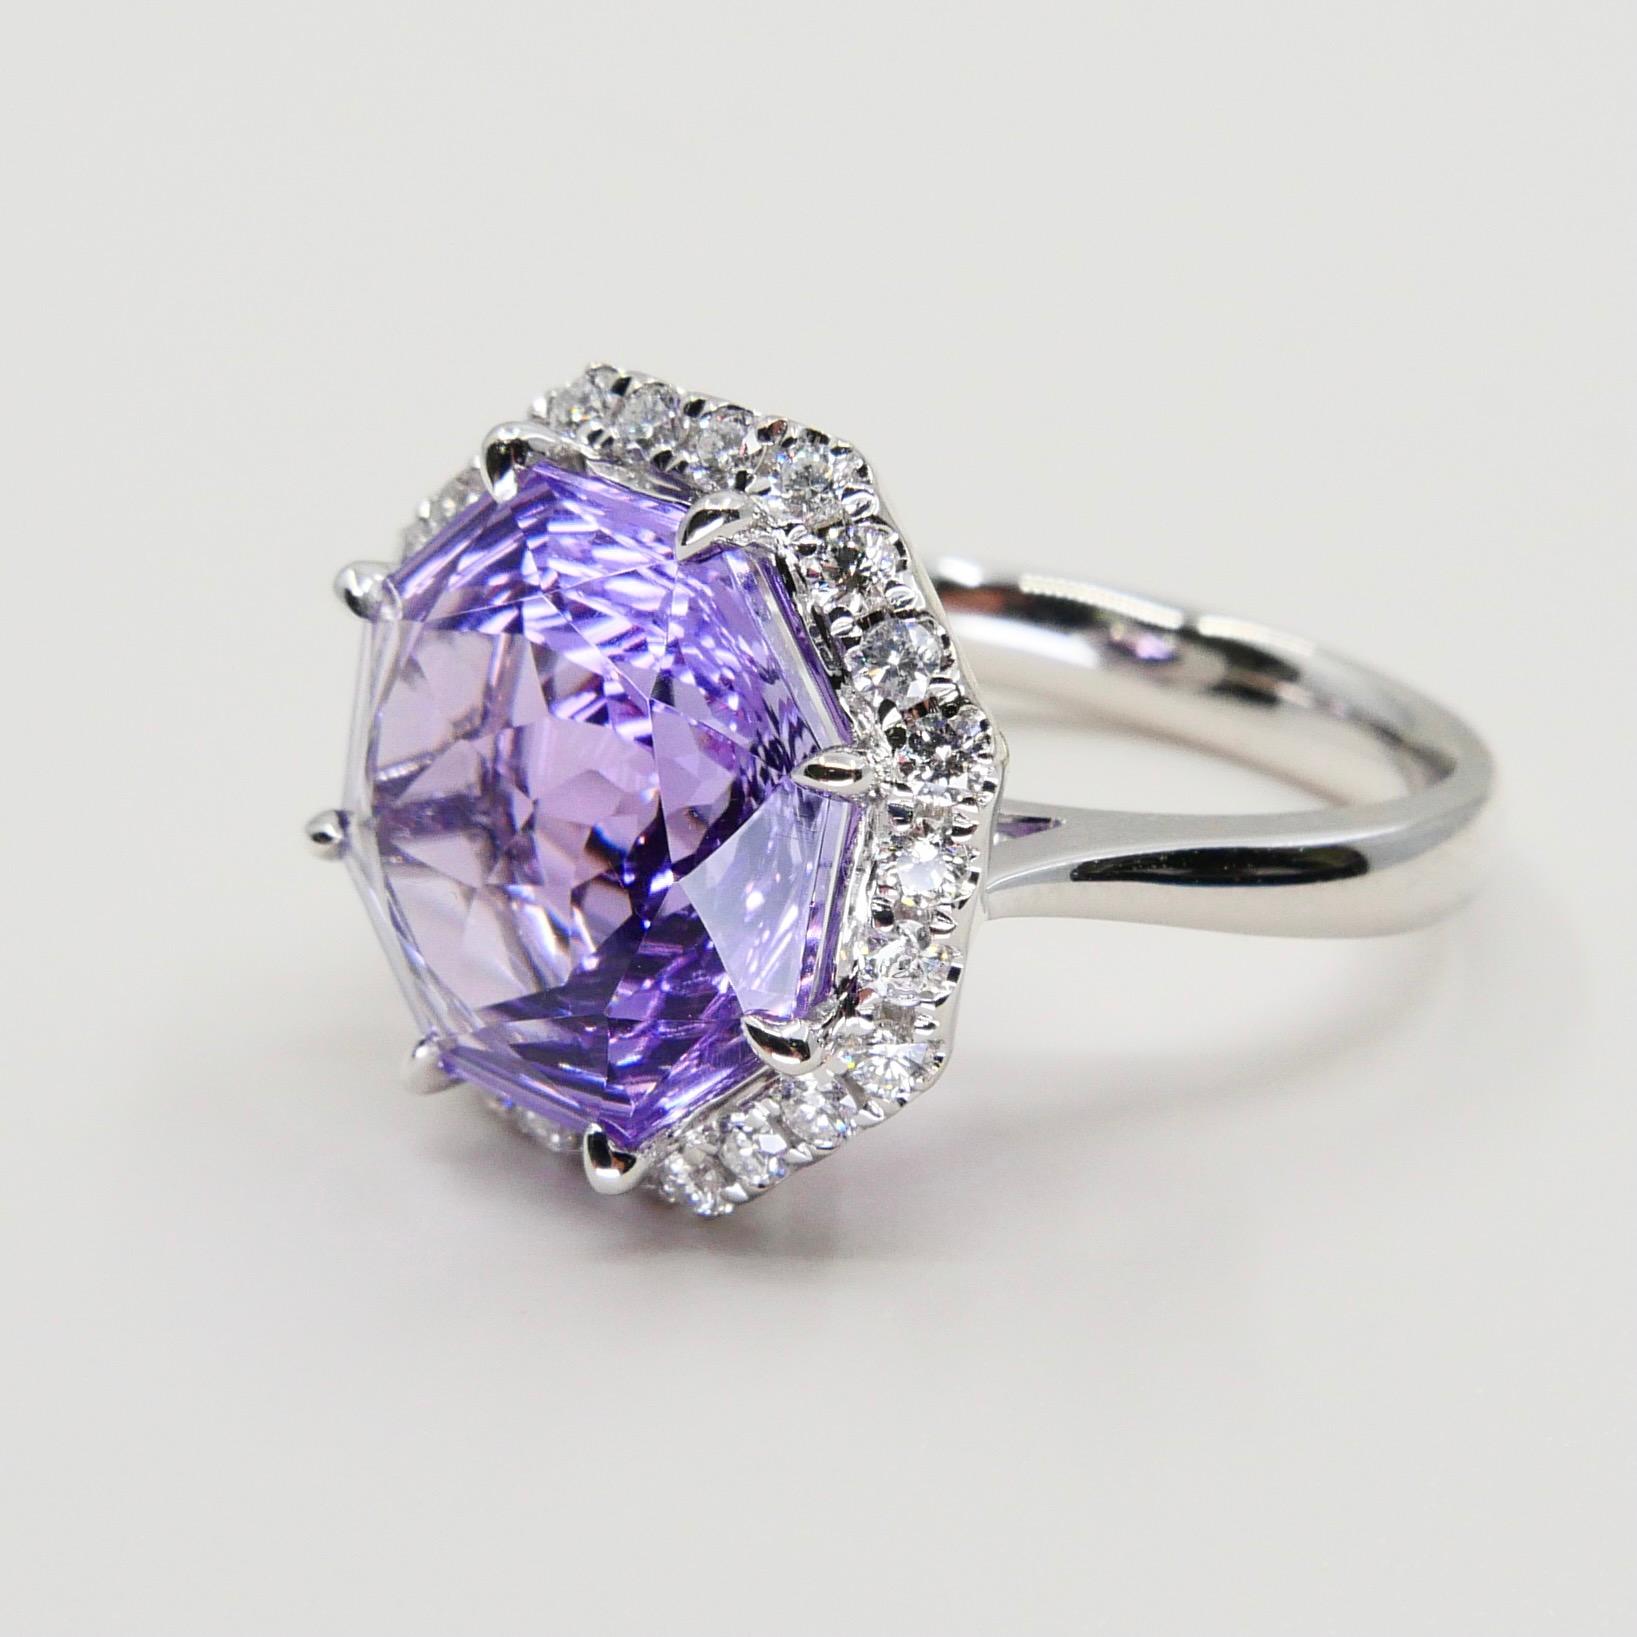 5.32 Carat Flower Cut Amethyst and Diamond Cocktail Ring, Statement Ring 3